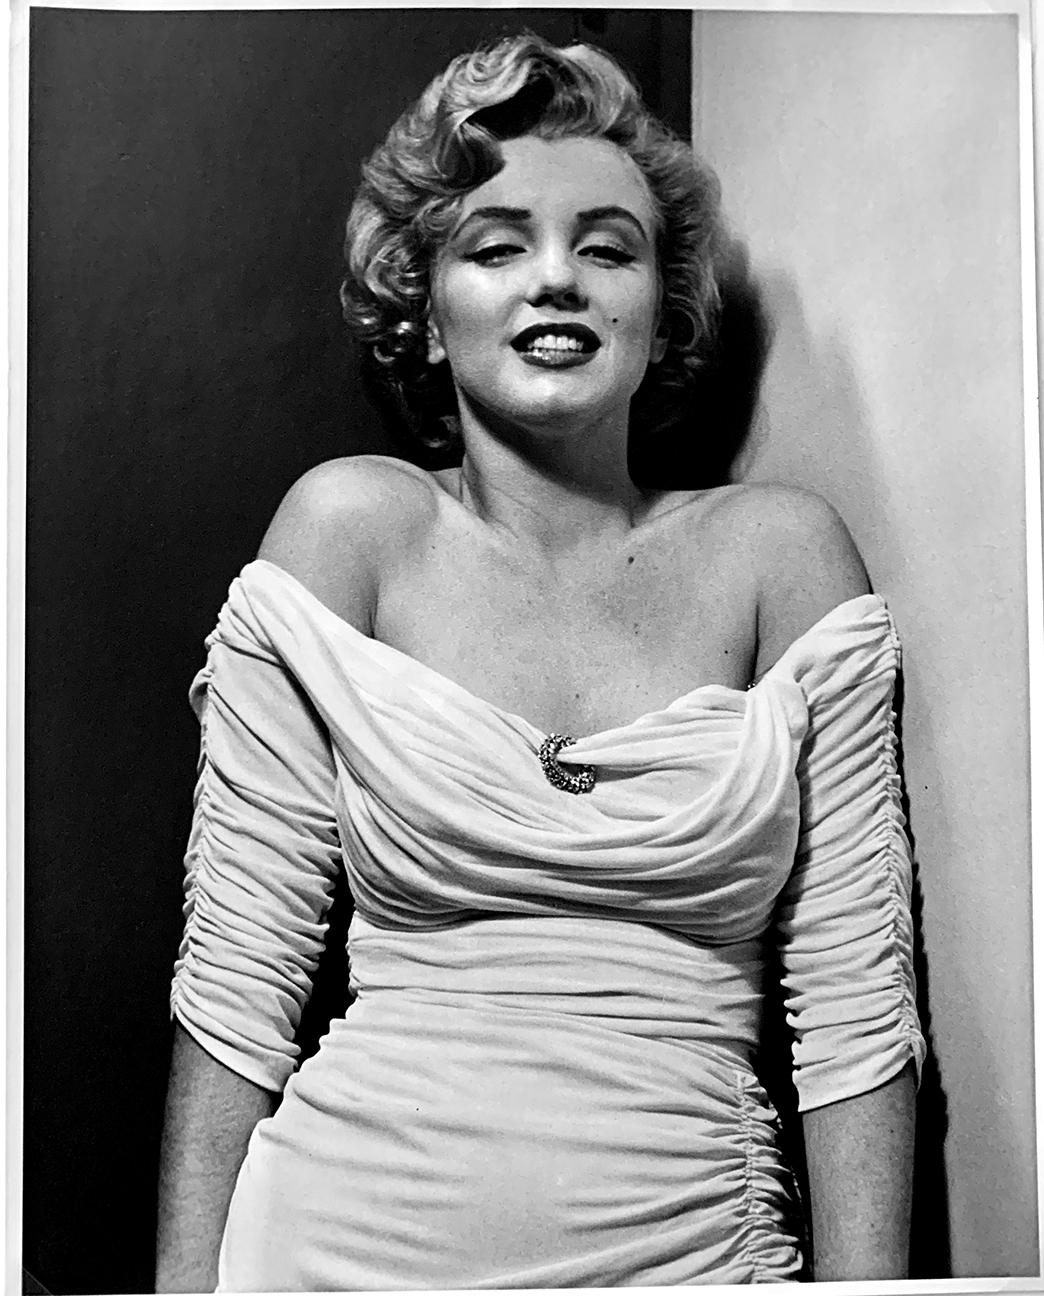 Philippe Halsman Portrait Photograph - Marilyn Monroe, Iconic Gelatin Silver Photograph of Hollywood Actress for TIME 